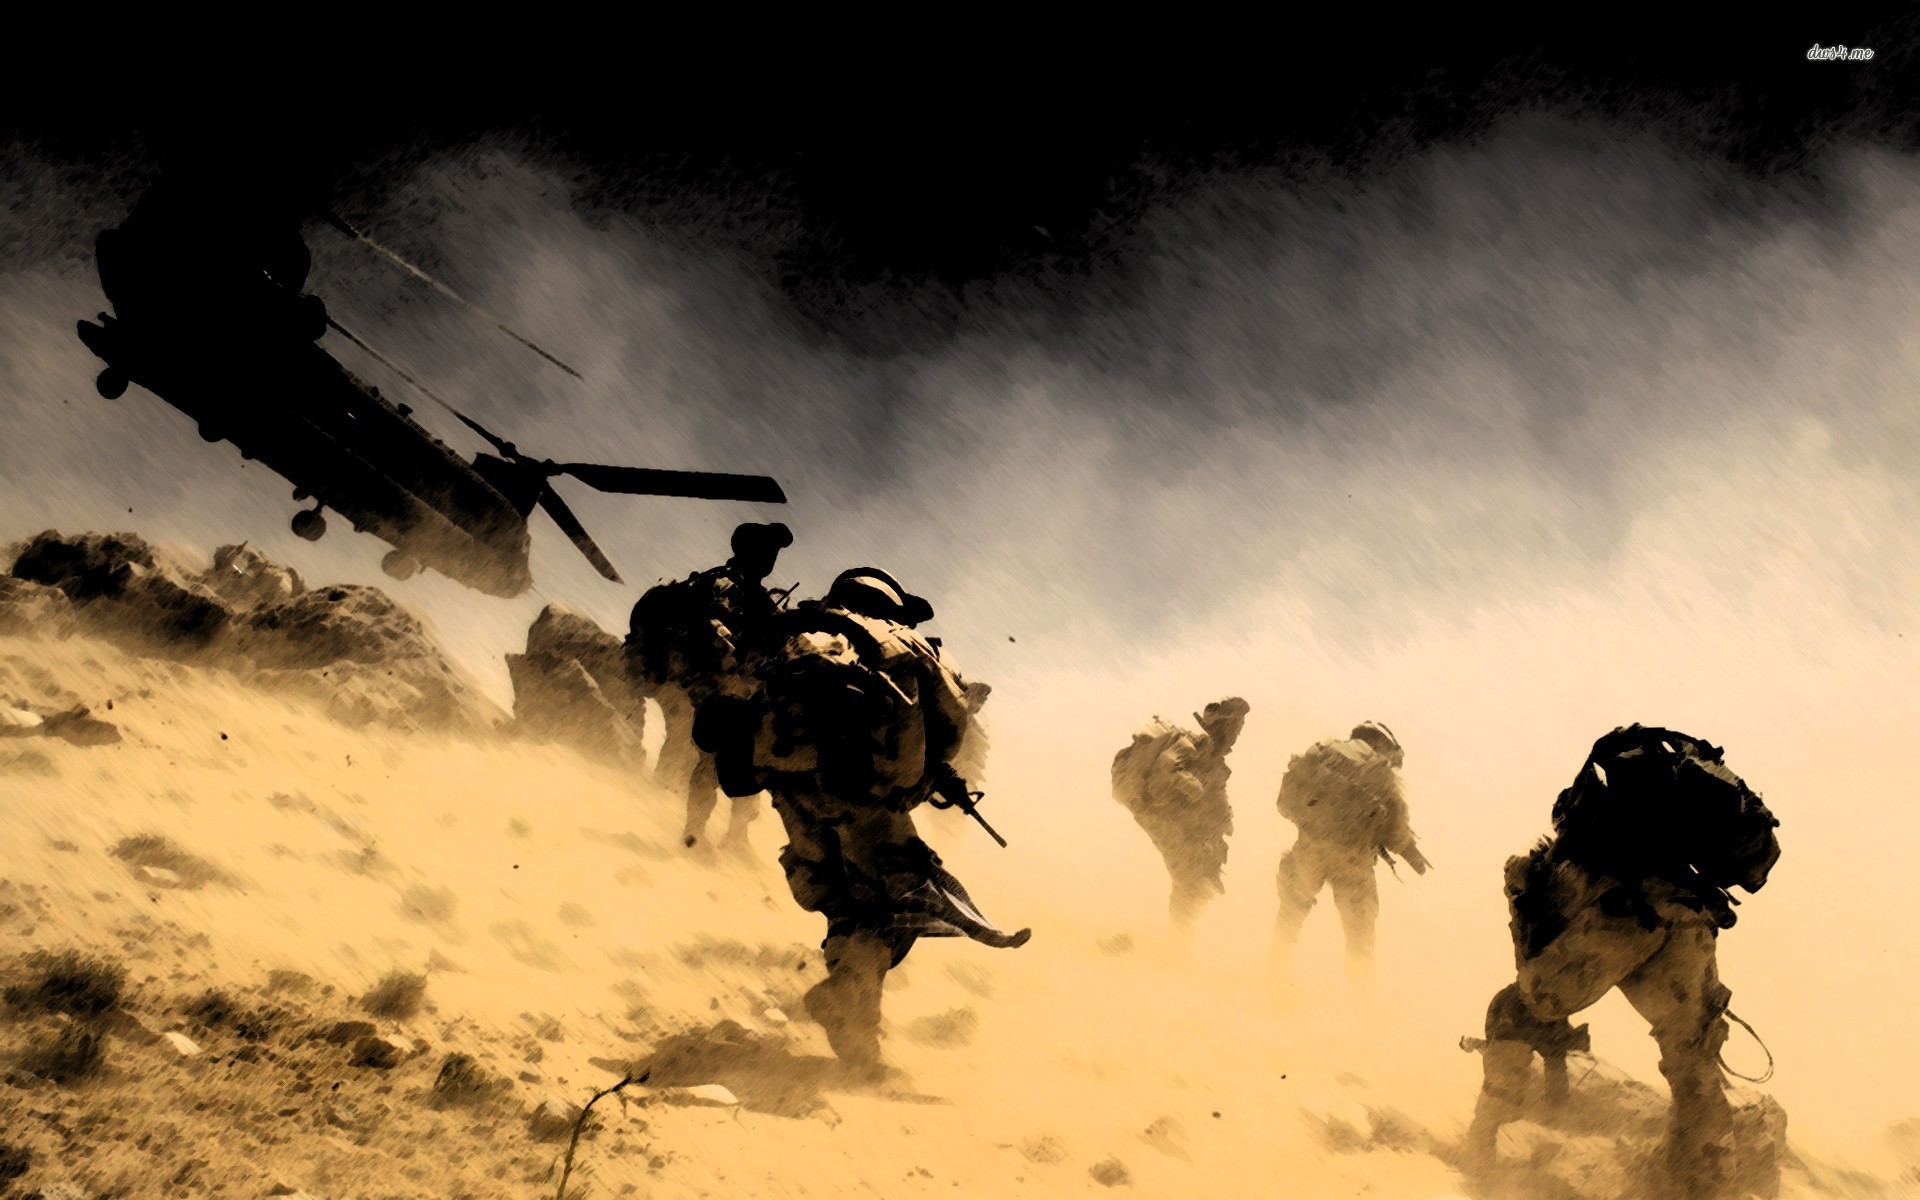  in fight military wallpapers image size 1920x1200px military pics